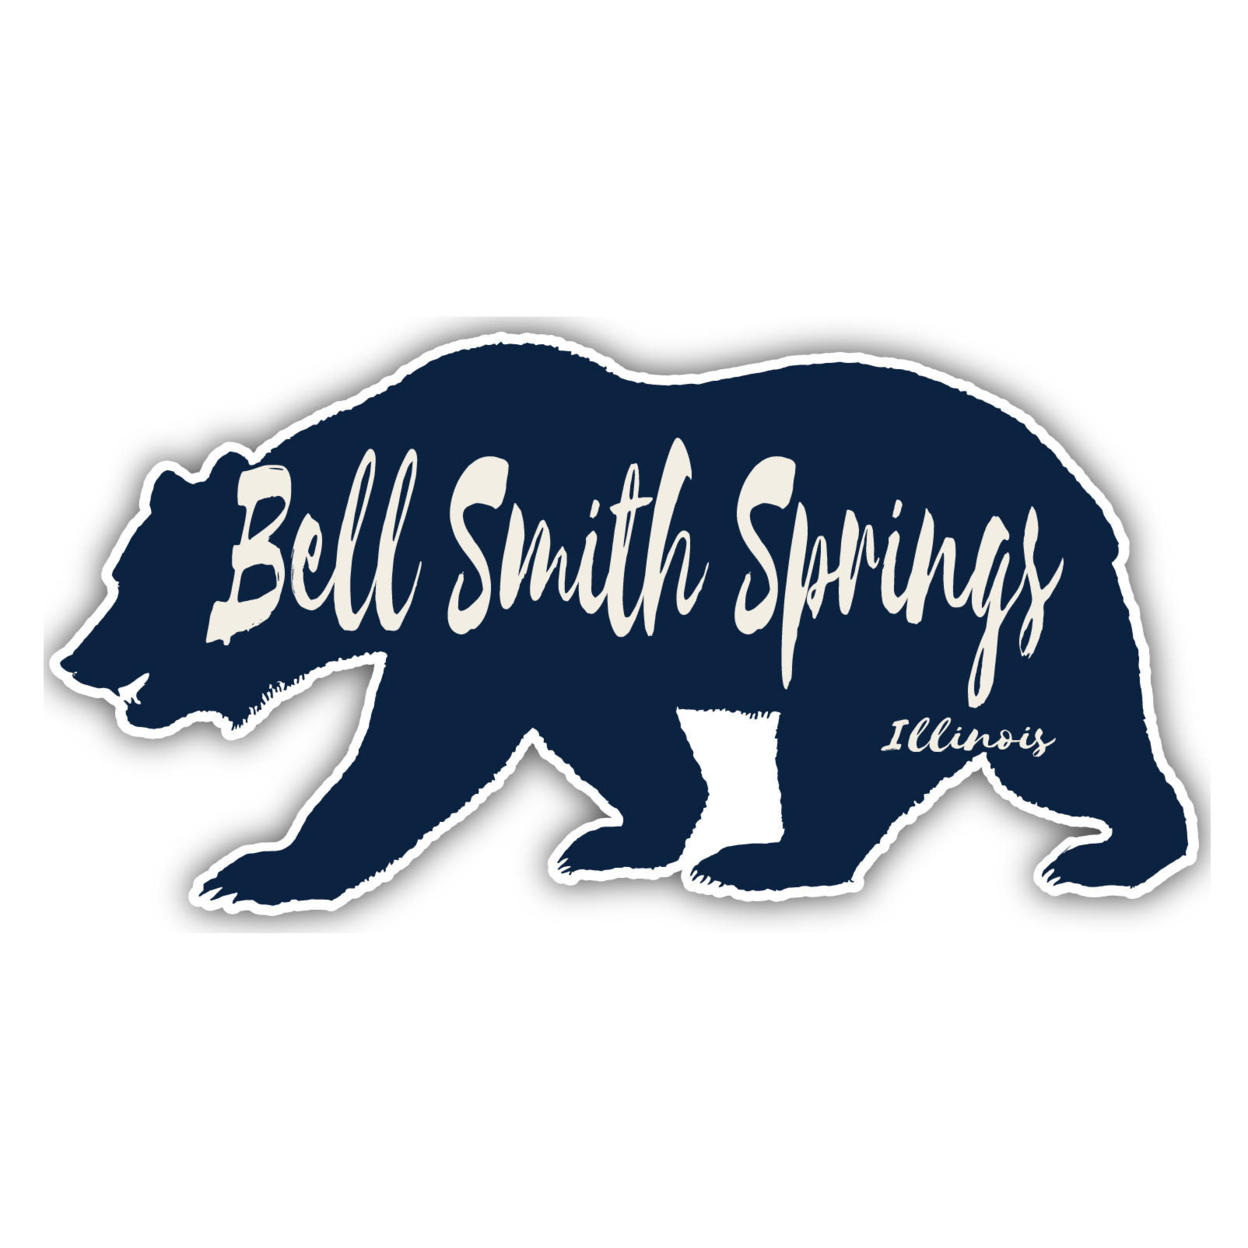 Bell Smith Springs Illinois Souvenir Decorative Stickers (Choose Theme And Size) - Single Unit, 8-Inch, Bear